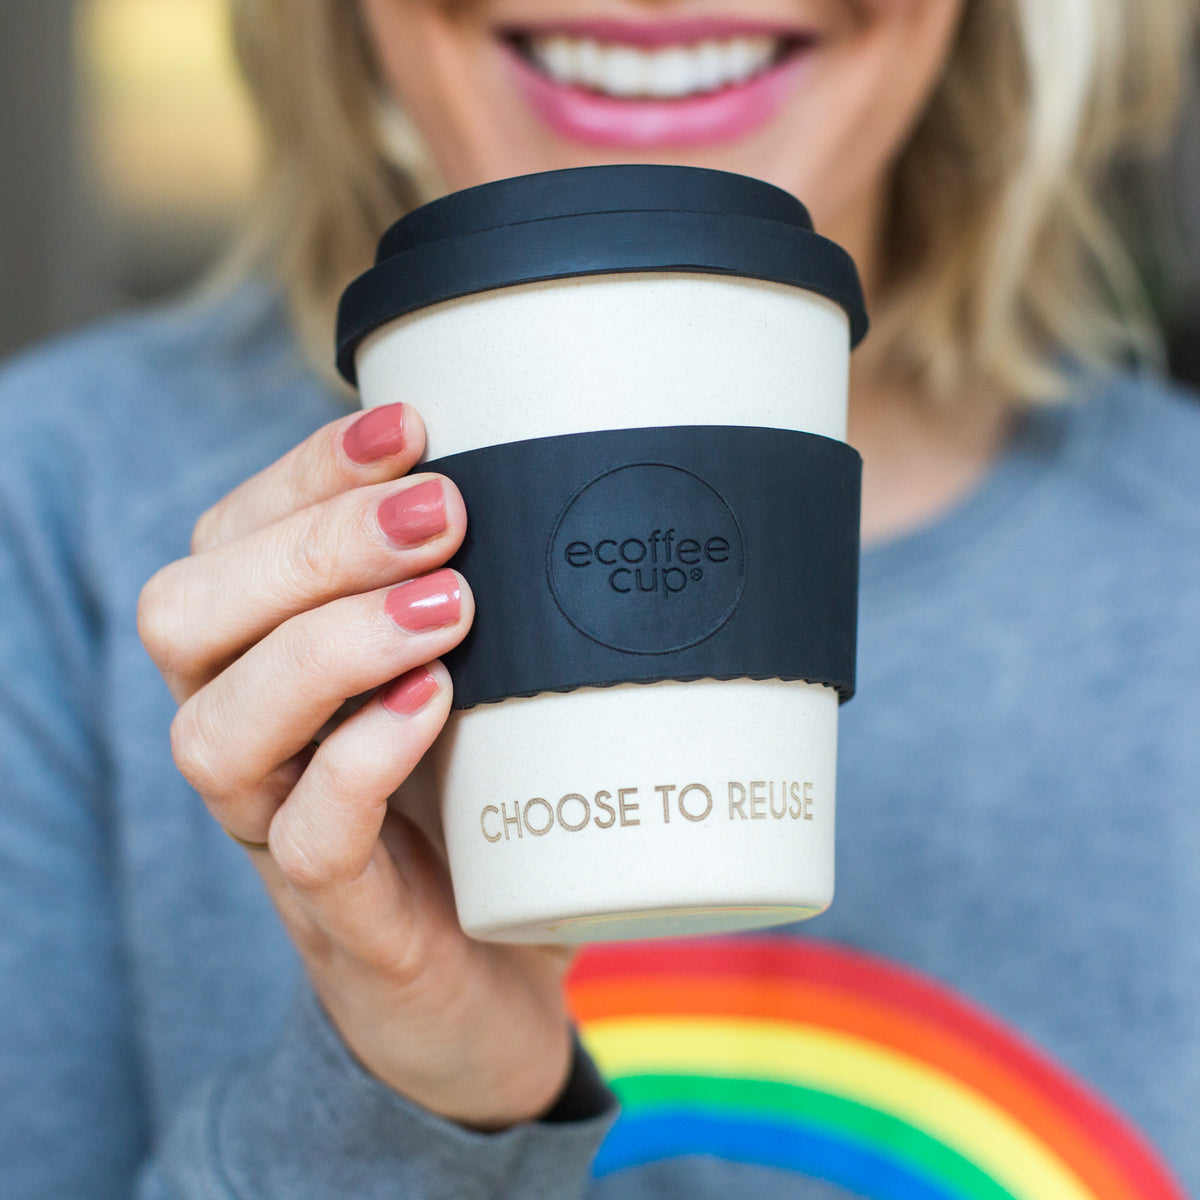 choose to reuse coffee cup ecoffee cup